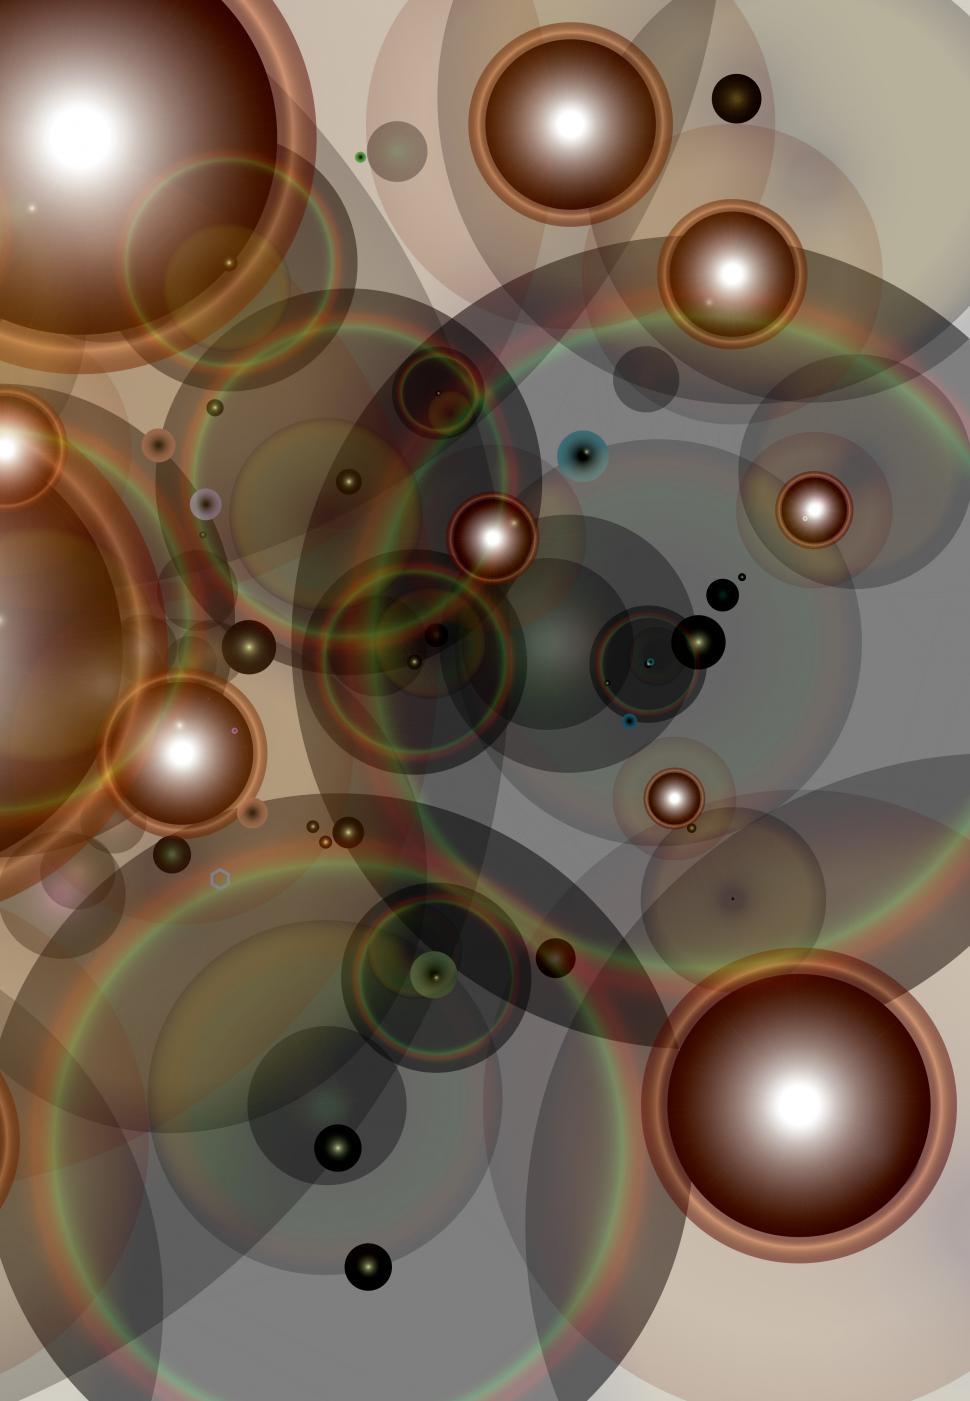 Free Image of Brown flare circular bubbles  